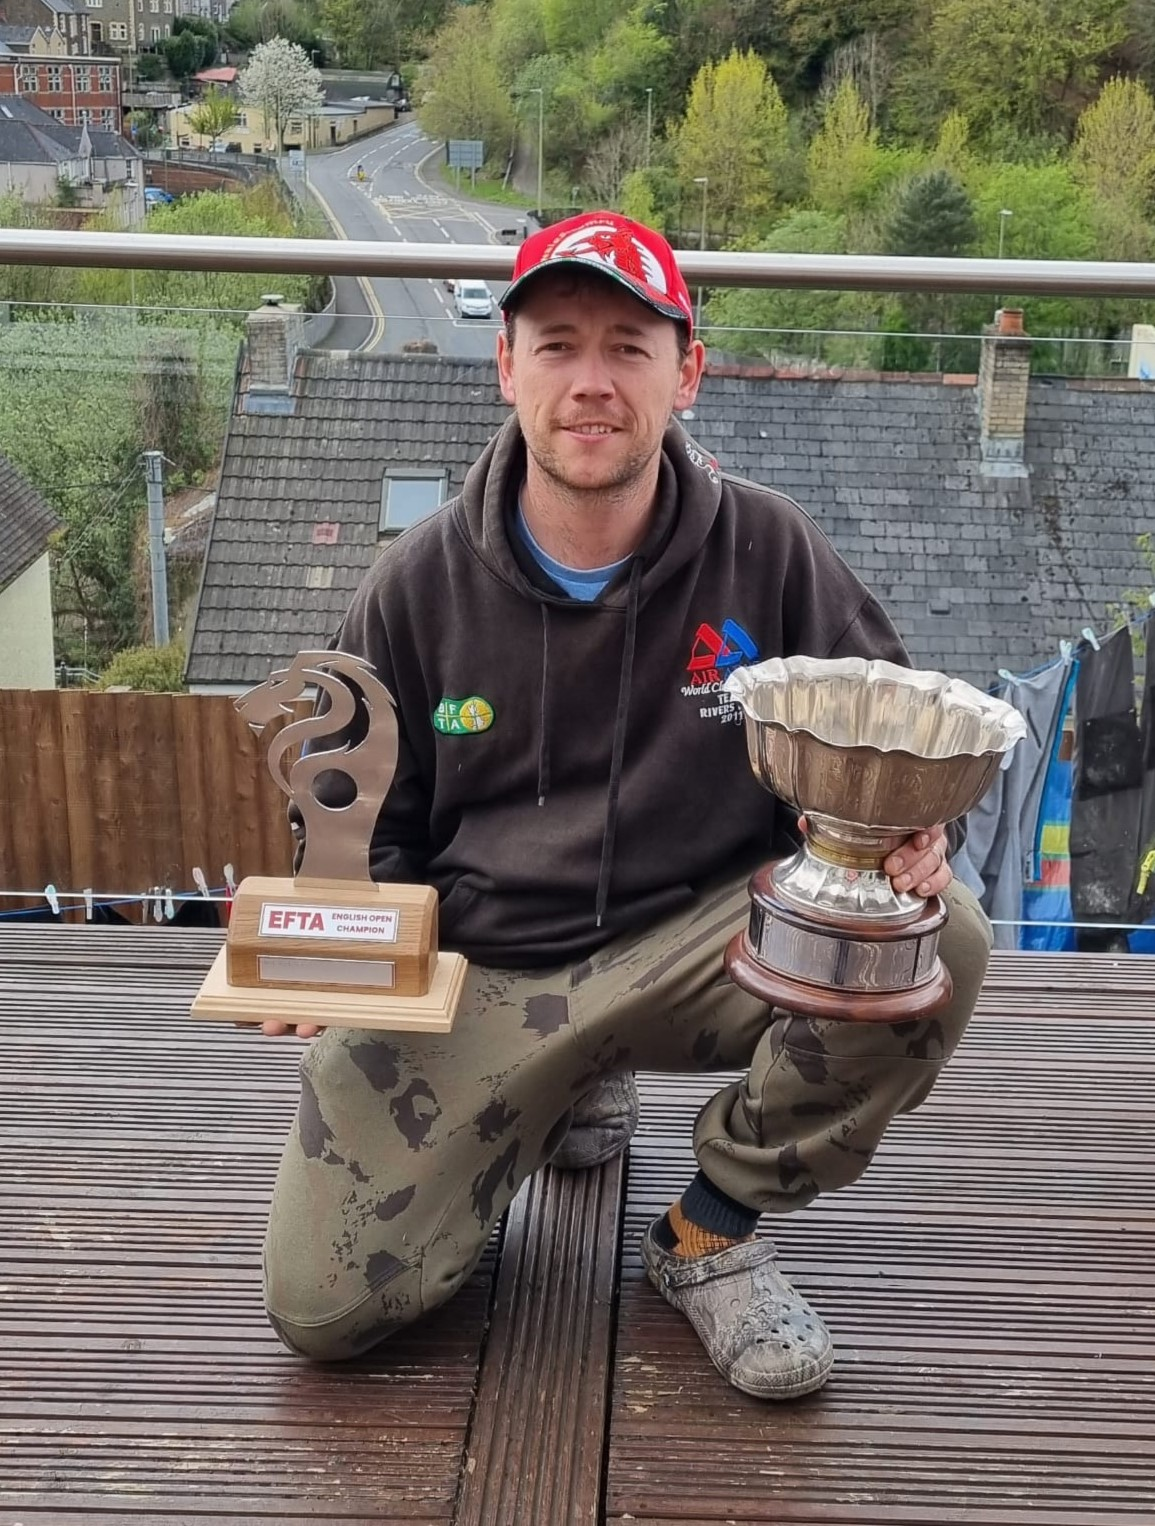 Jack with his EFTA Open and BFTA Championships trophies